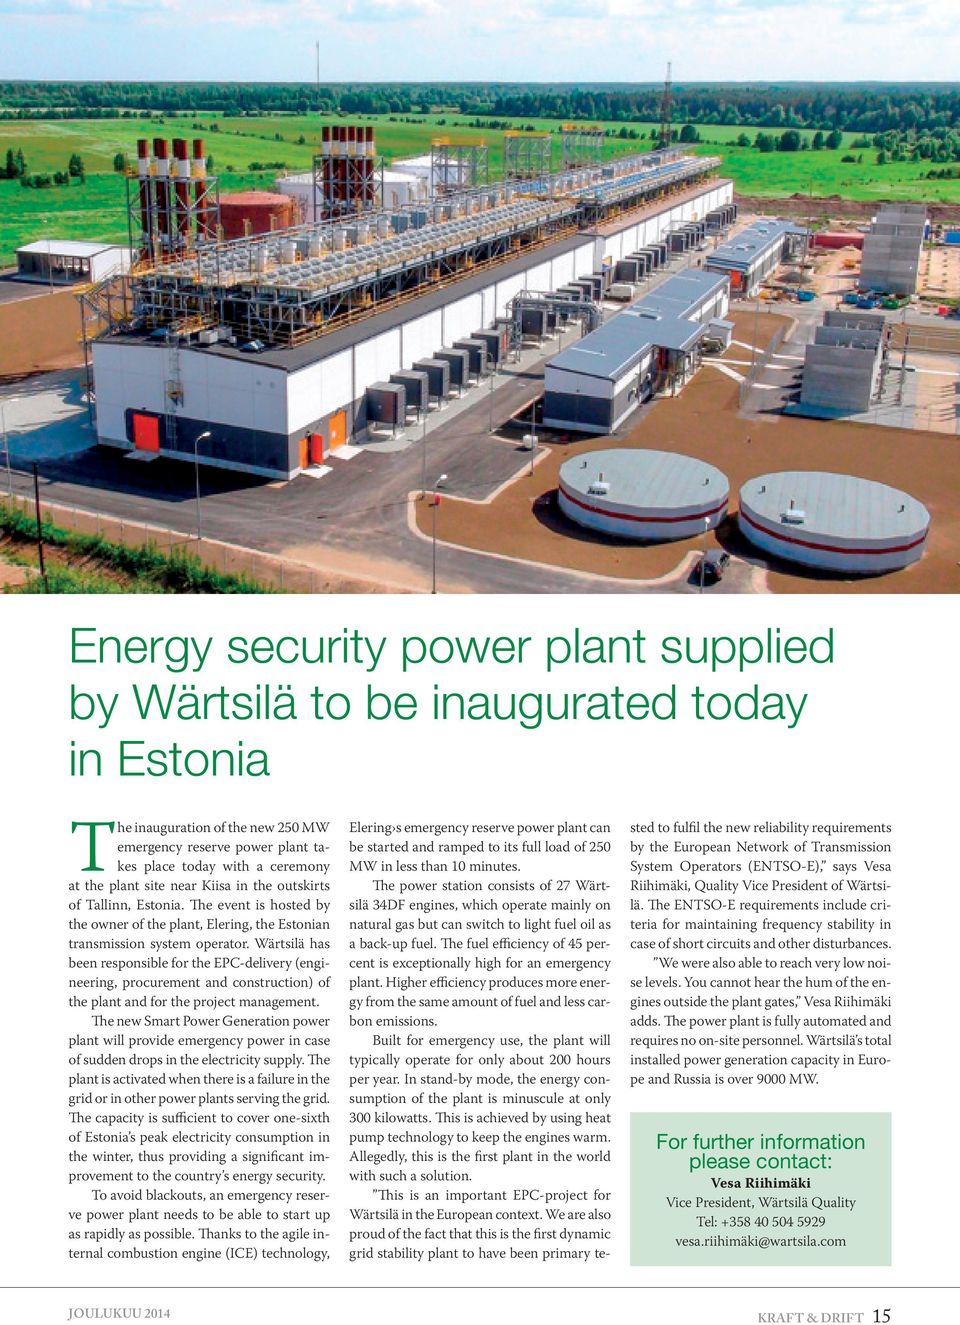 Wärtsilä has been responsible for the EPC-delivery (engineering, procurement and construction) of the plant and for the project management.